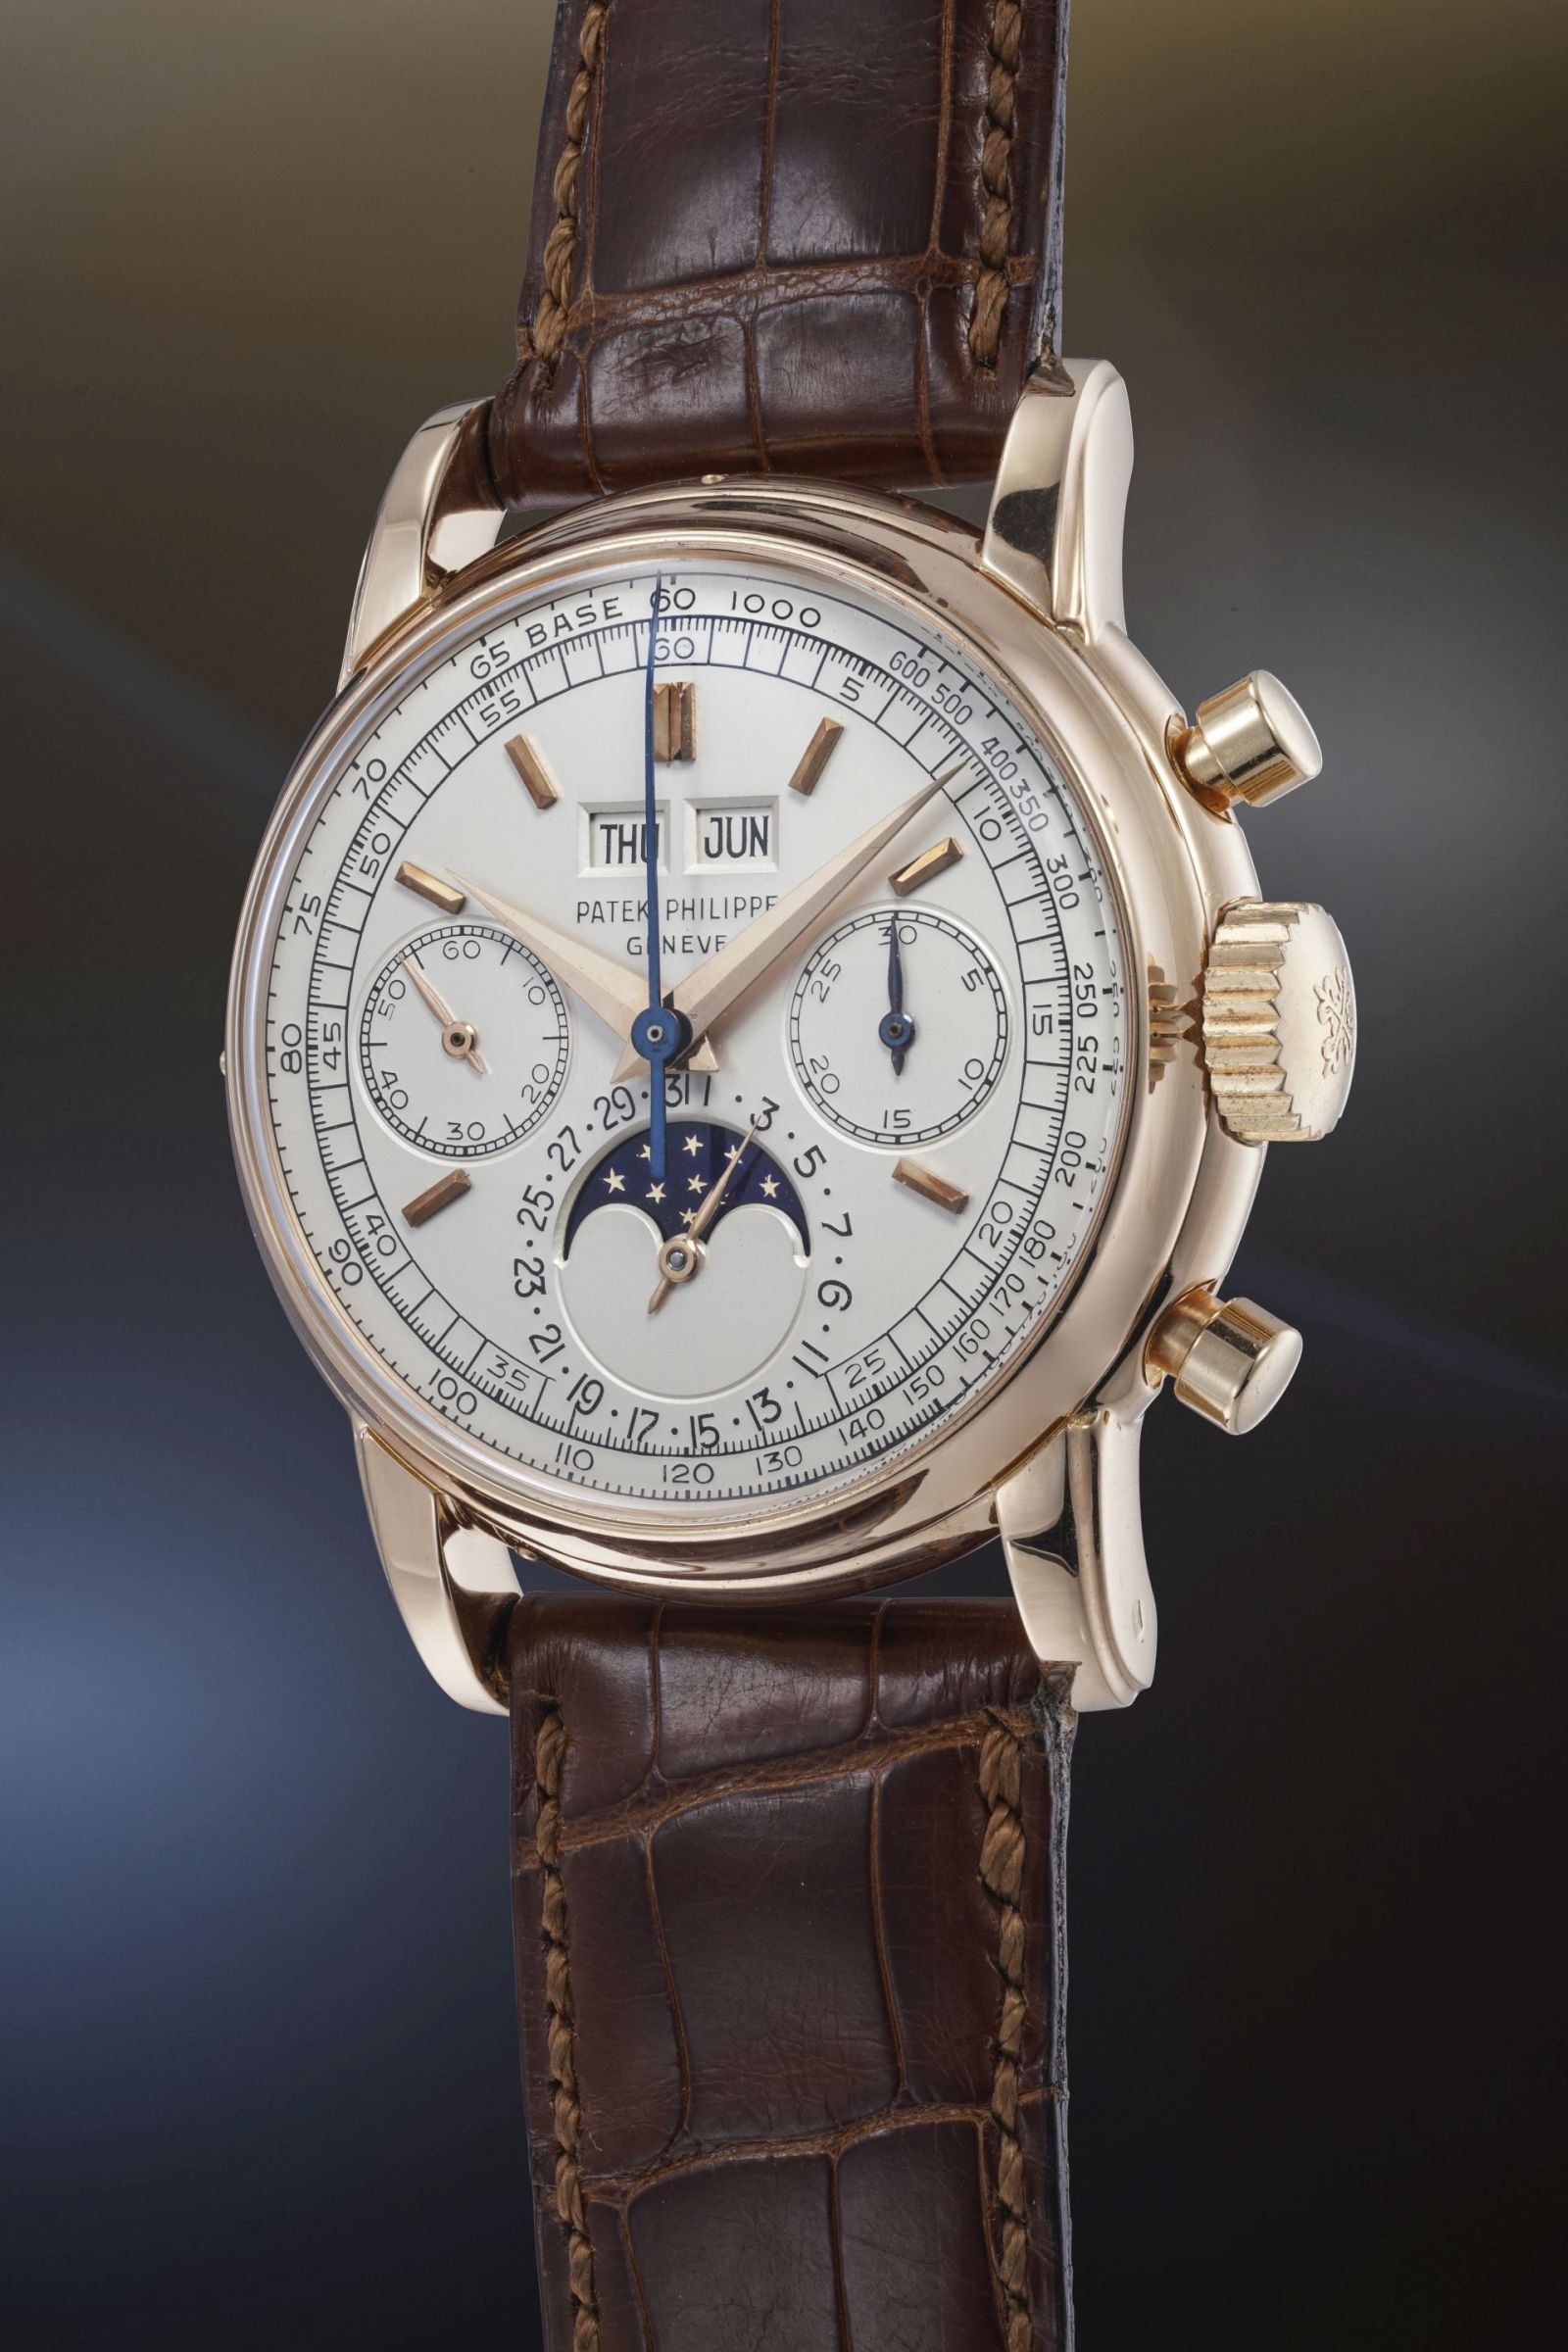 Phillips The Geneva Watch Auction: XVII on 13 & 14 May – Posts